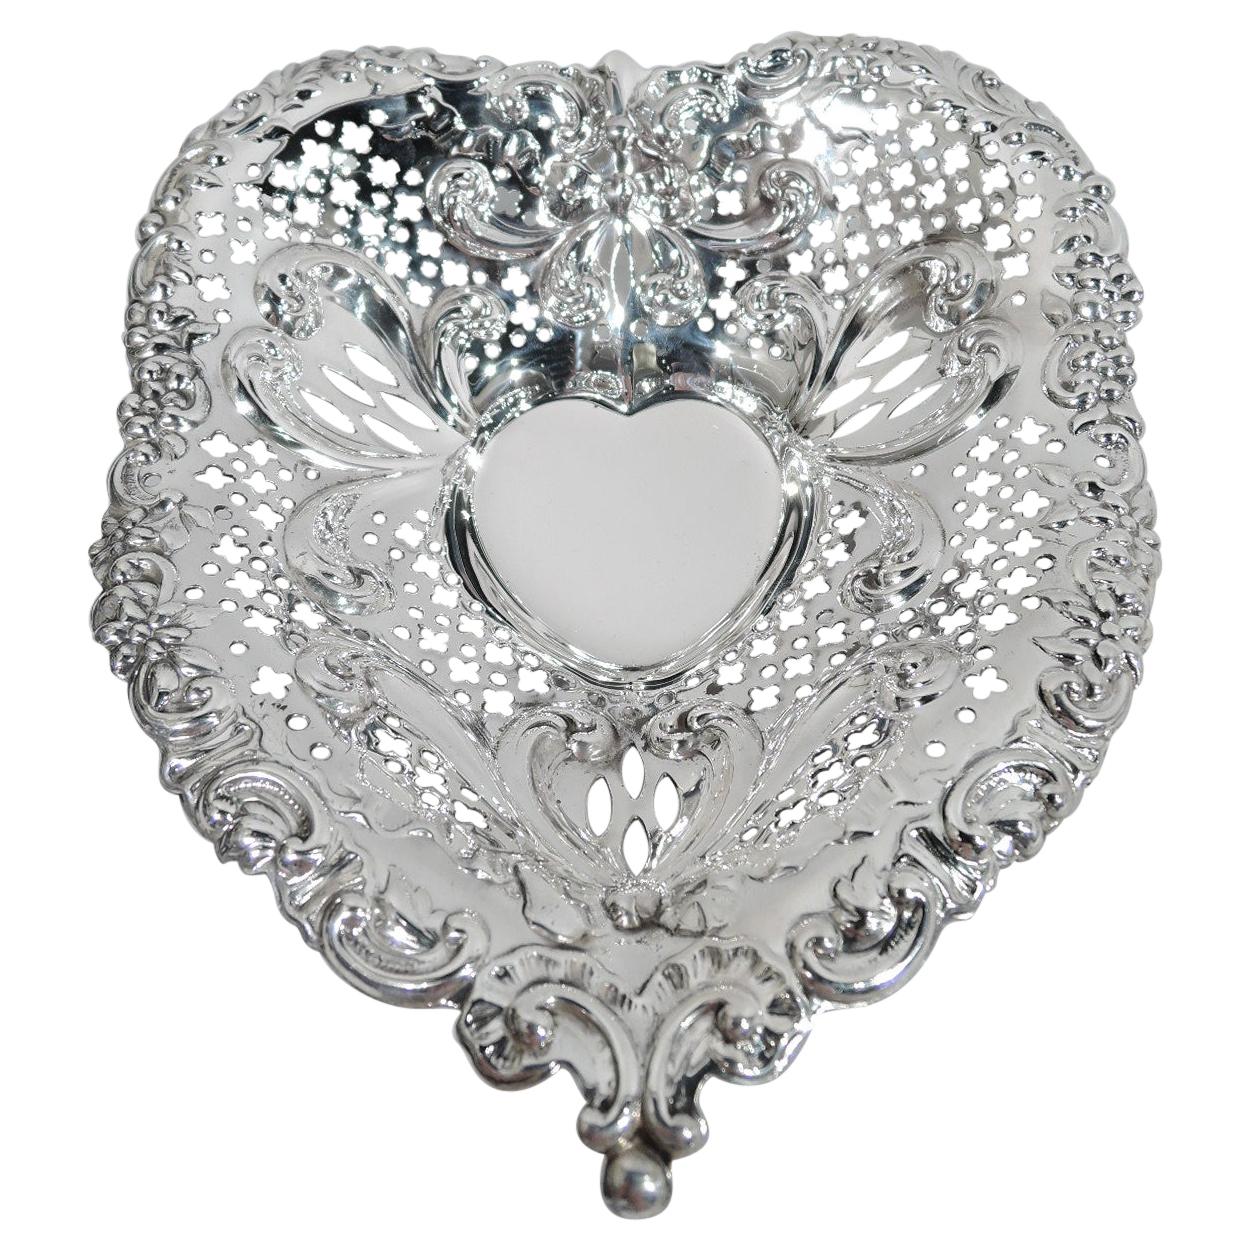 Exuberantly Romantic Sterling Silver Heart Bowl by Gorham